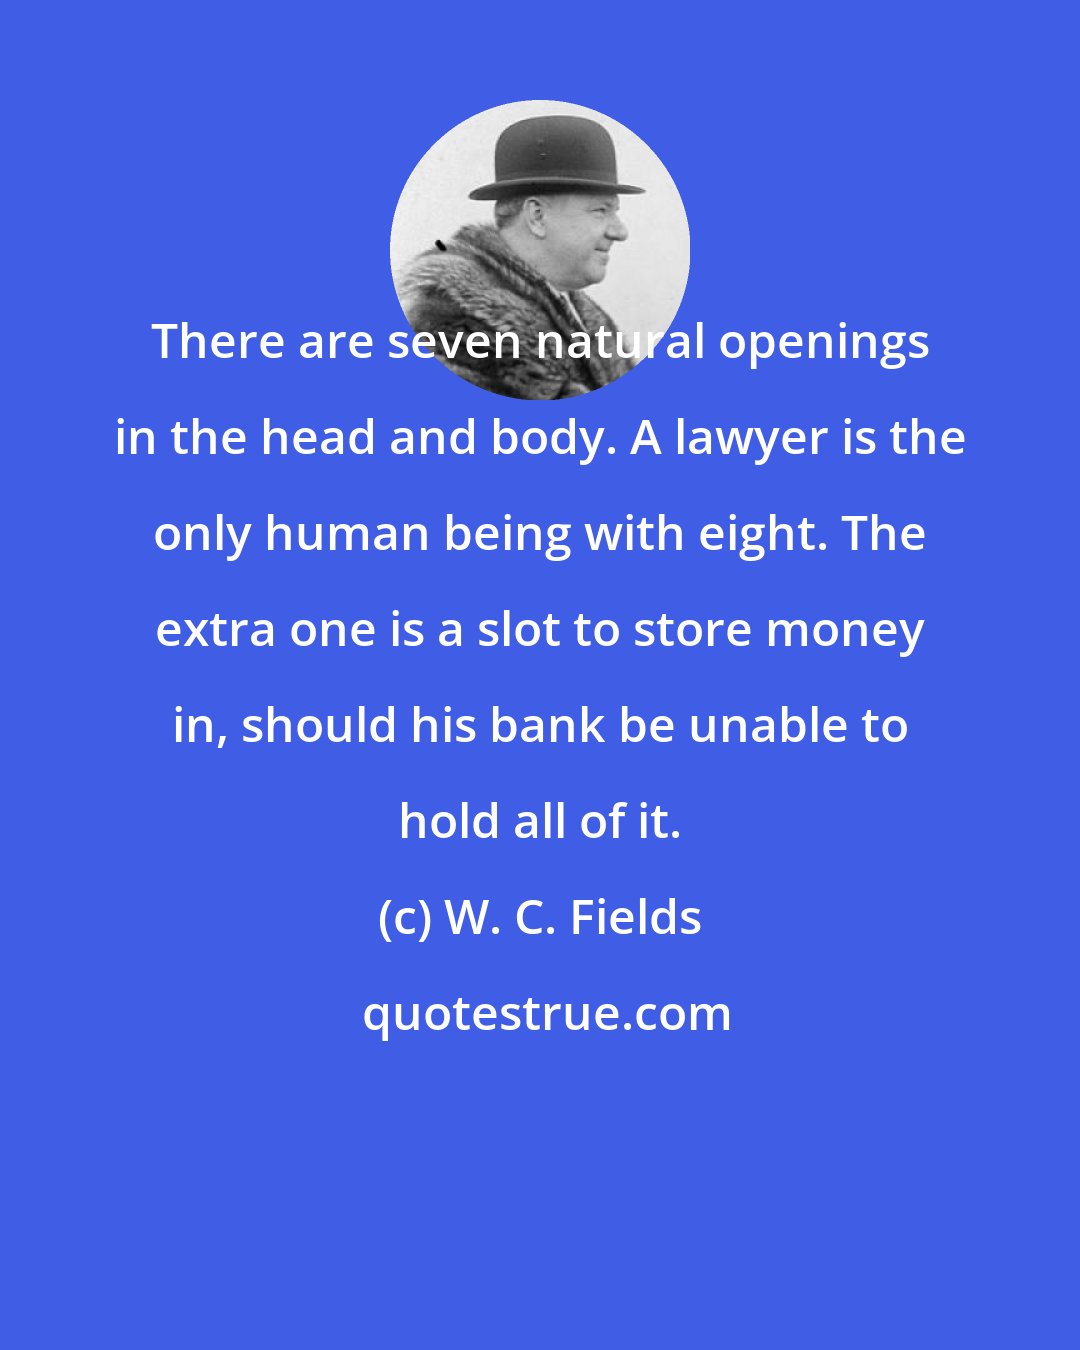 W. C. Fields: There are seven natural openings in the head and body. A lawyer is the only human being with eight. The extra one is a slot to store money in, should his bank be unable to hold all of it.